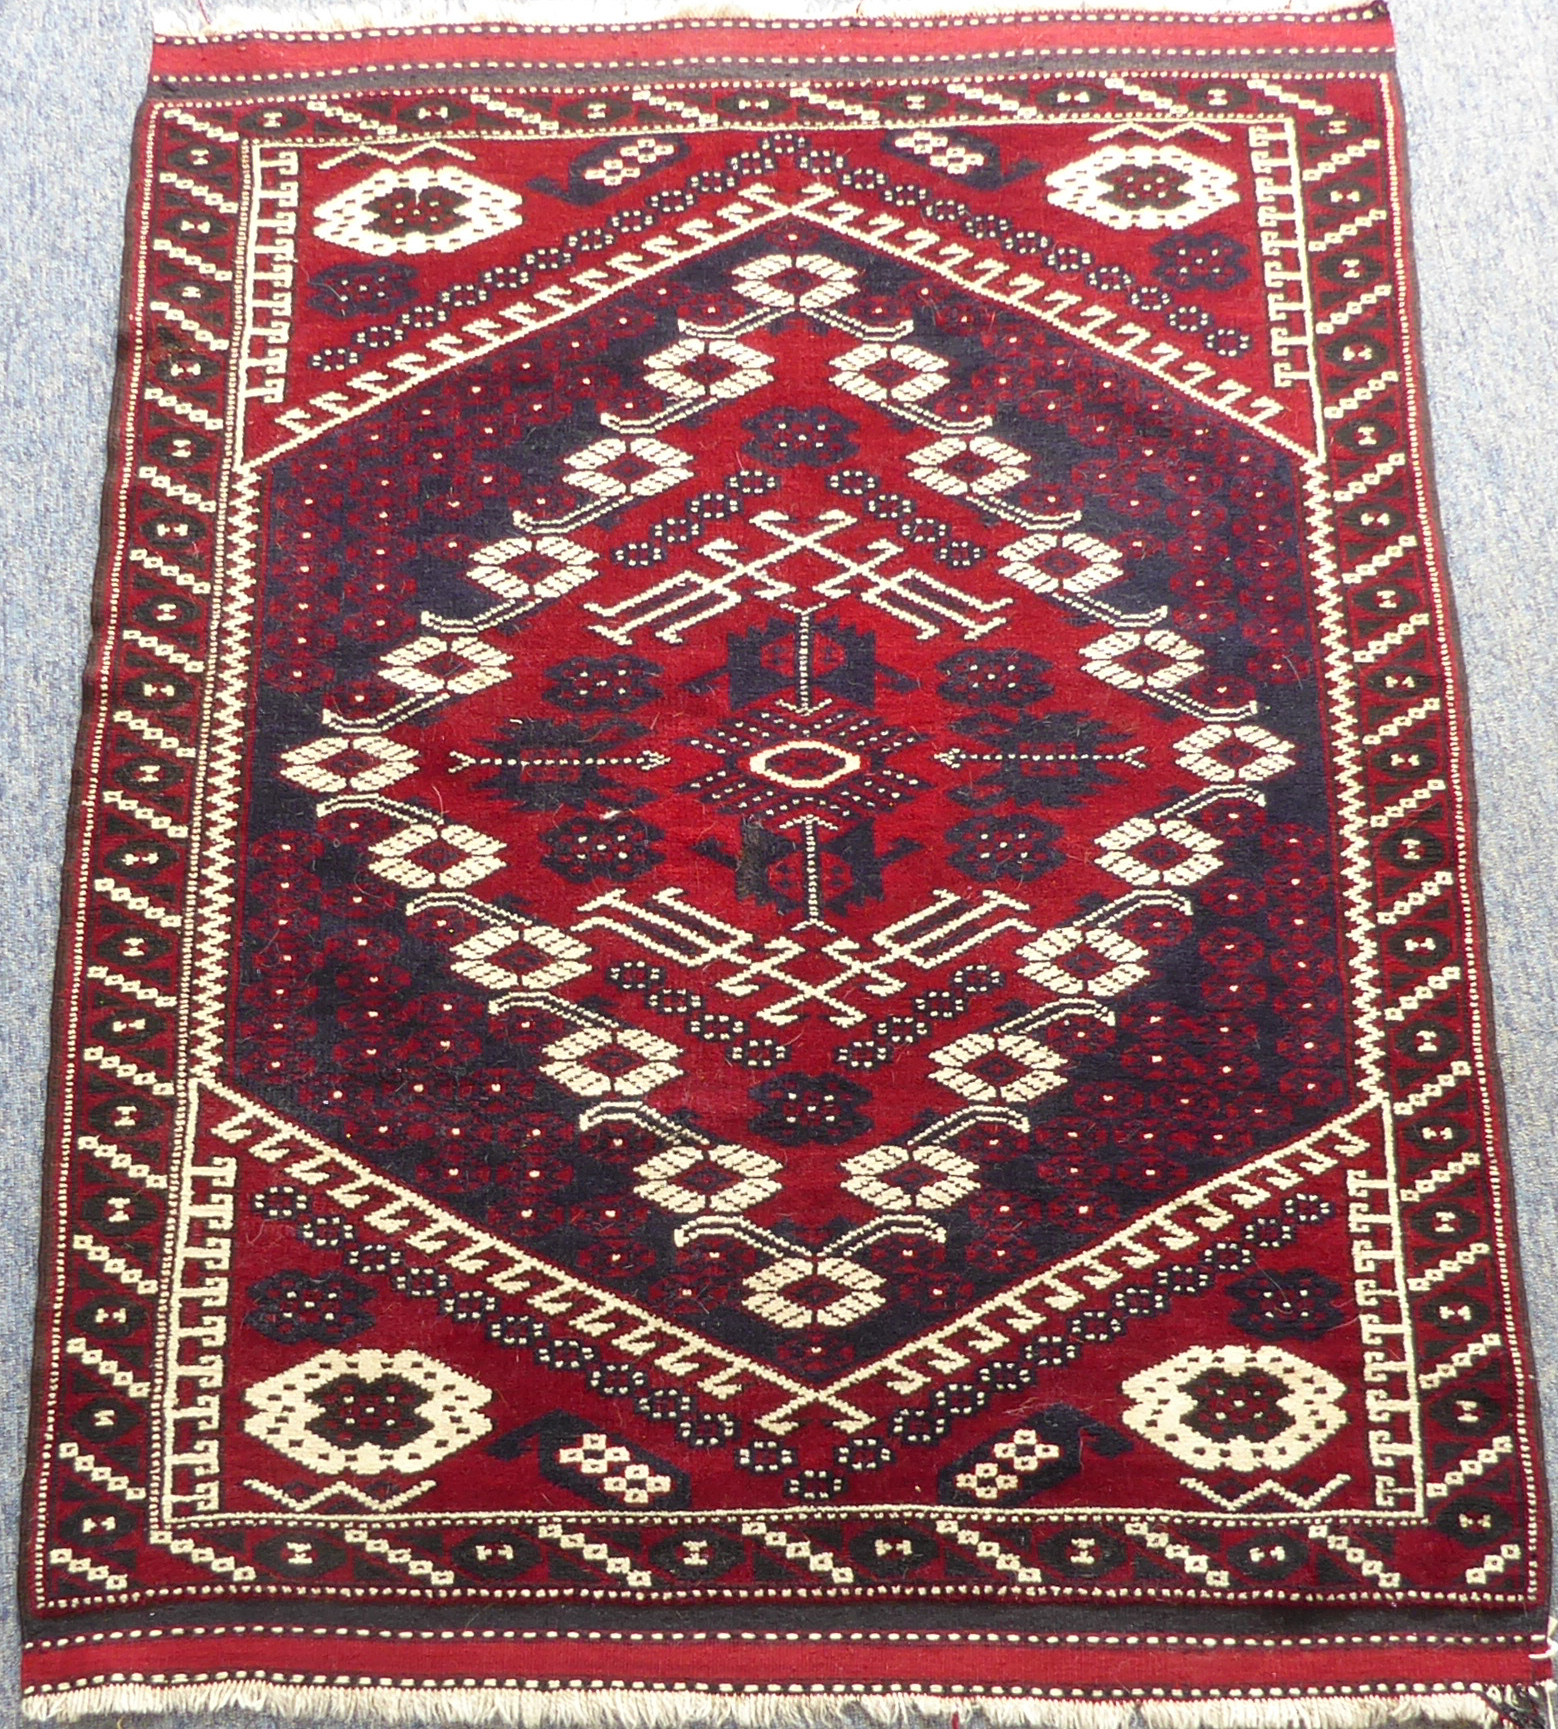 A modern 20th century Turkish Bergama rug; red ground, typical Bergama design with red central